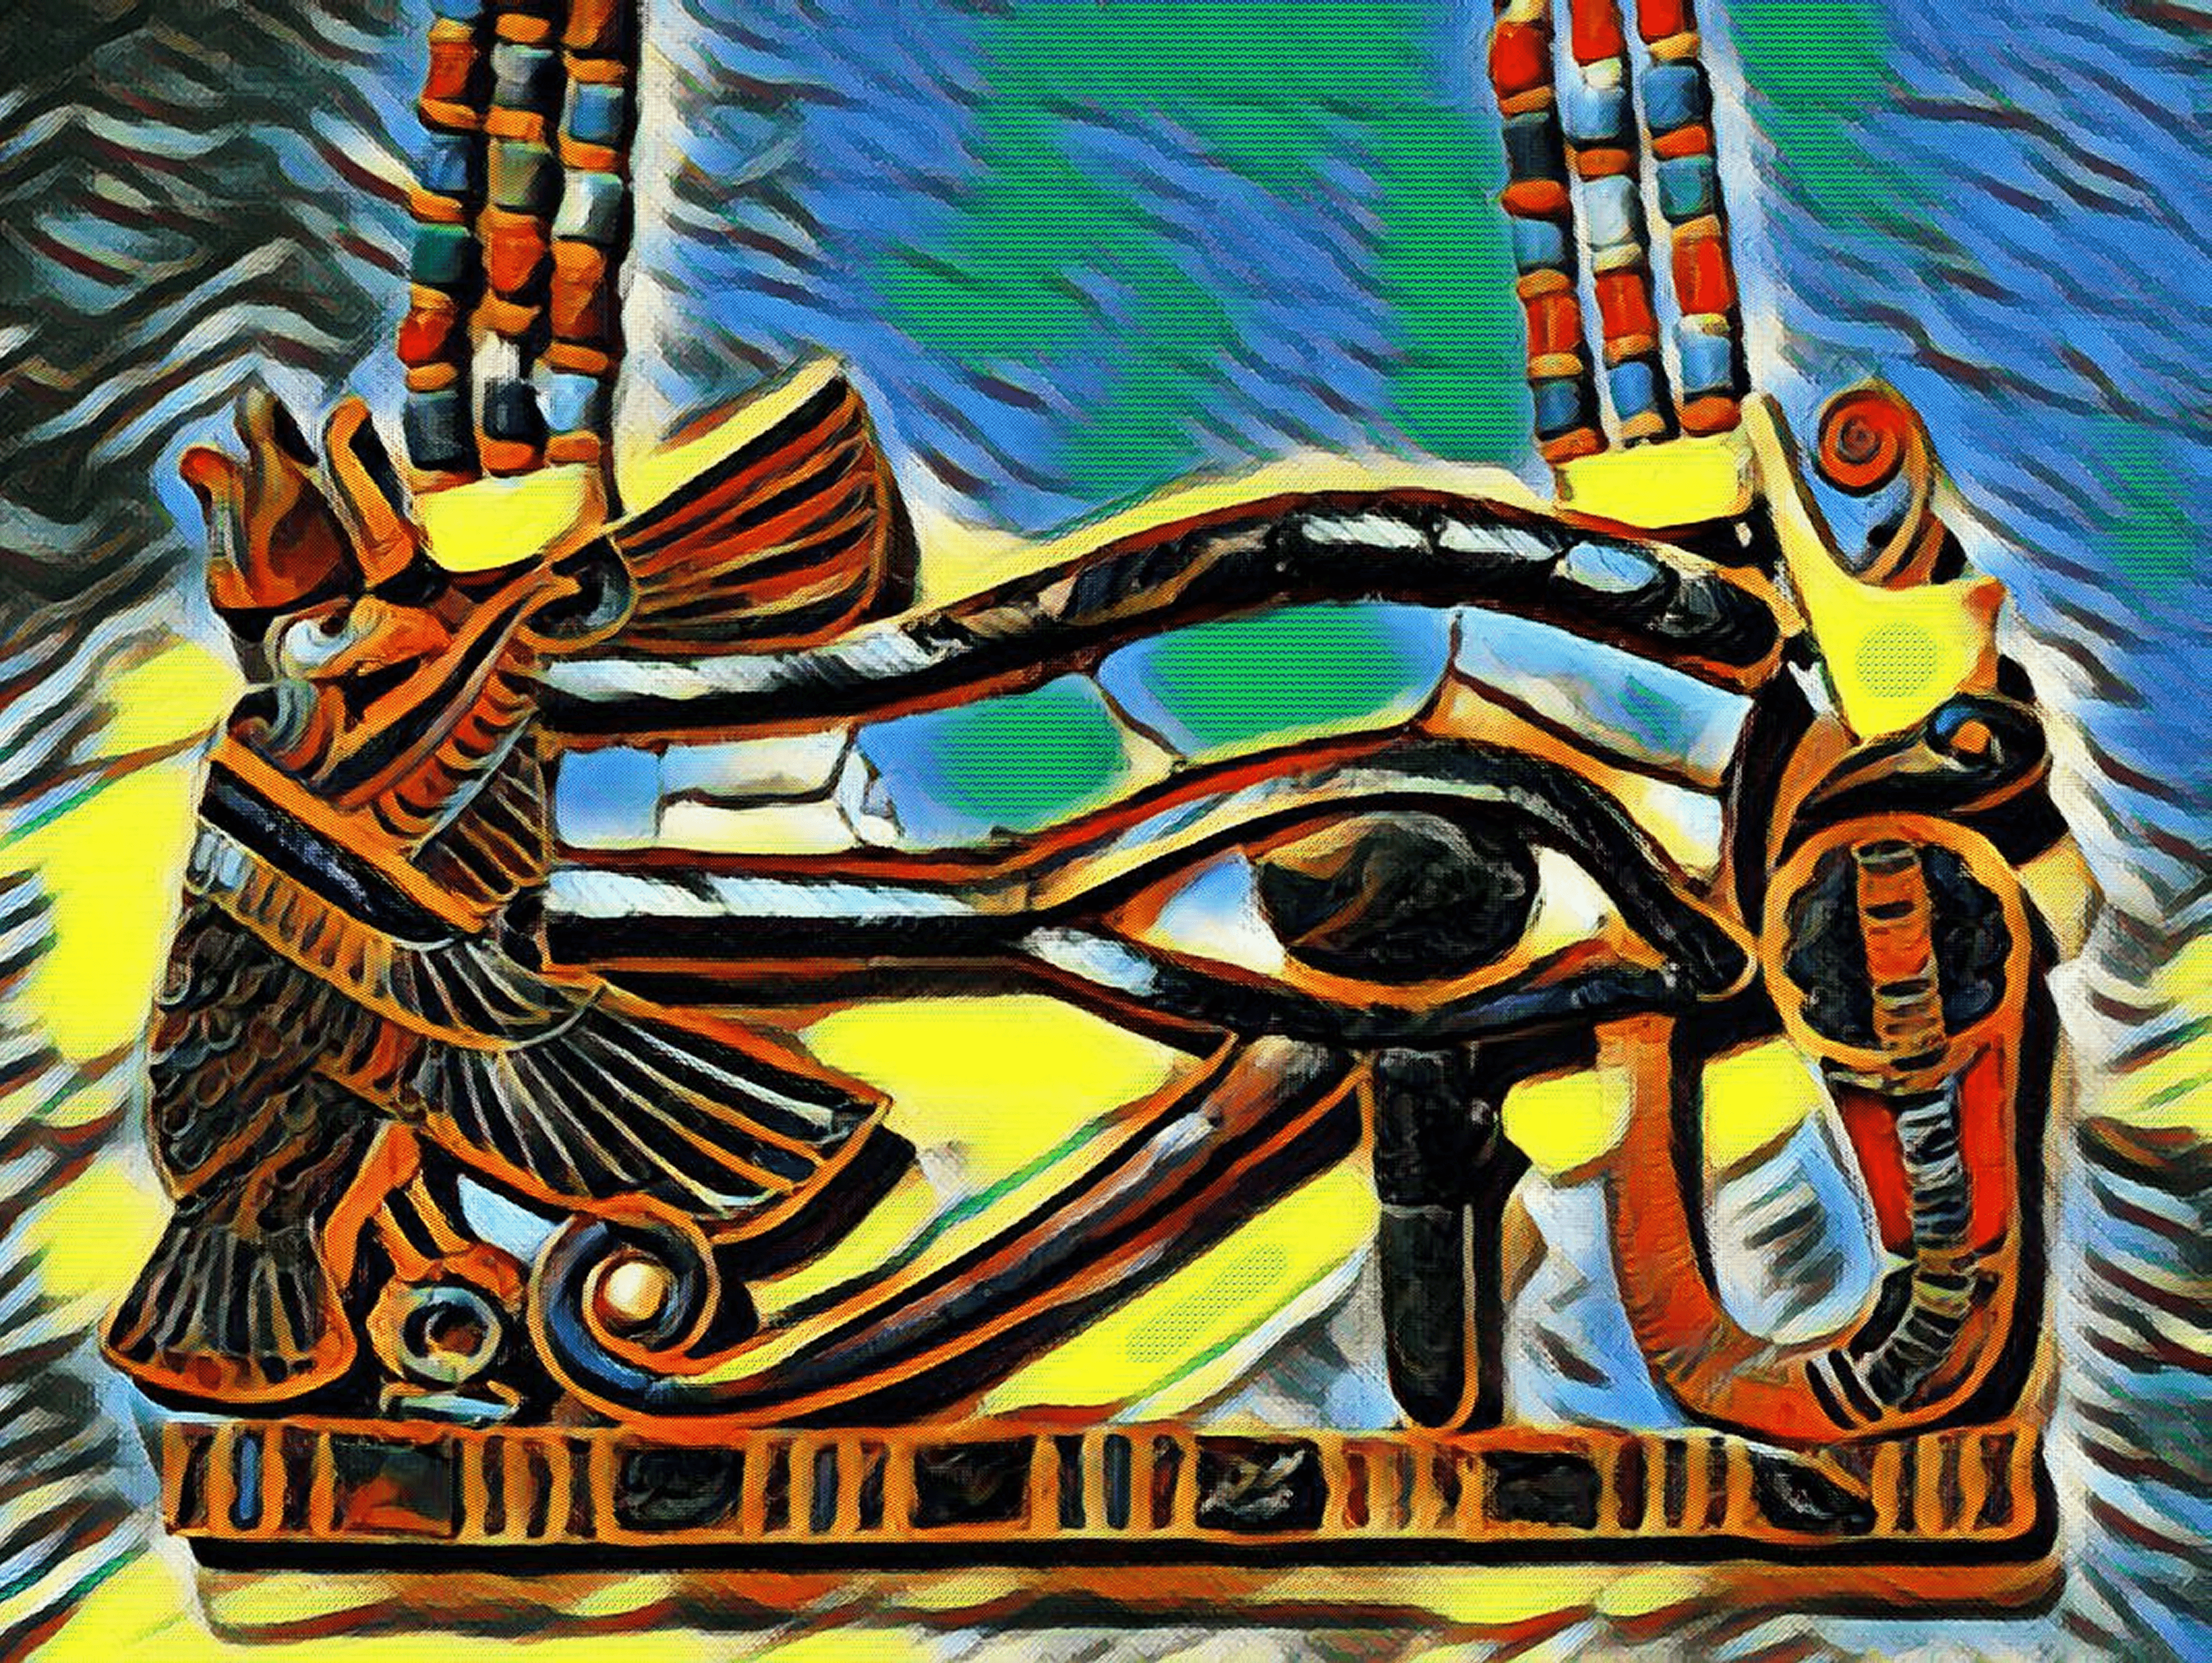 Eye of RA Egyptian God NFT Pop Art NFT by SOLLOG Limited Minting 10 Copies on Polygon Opensea